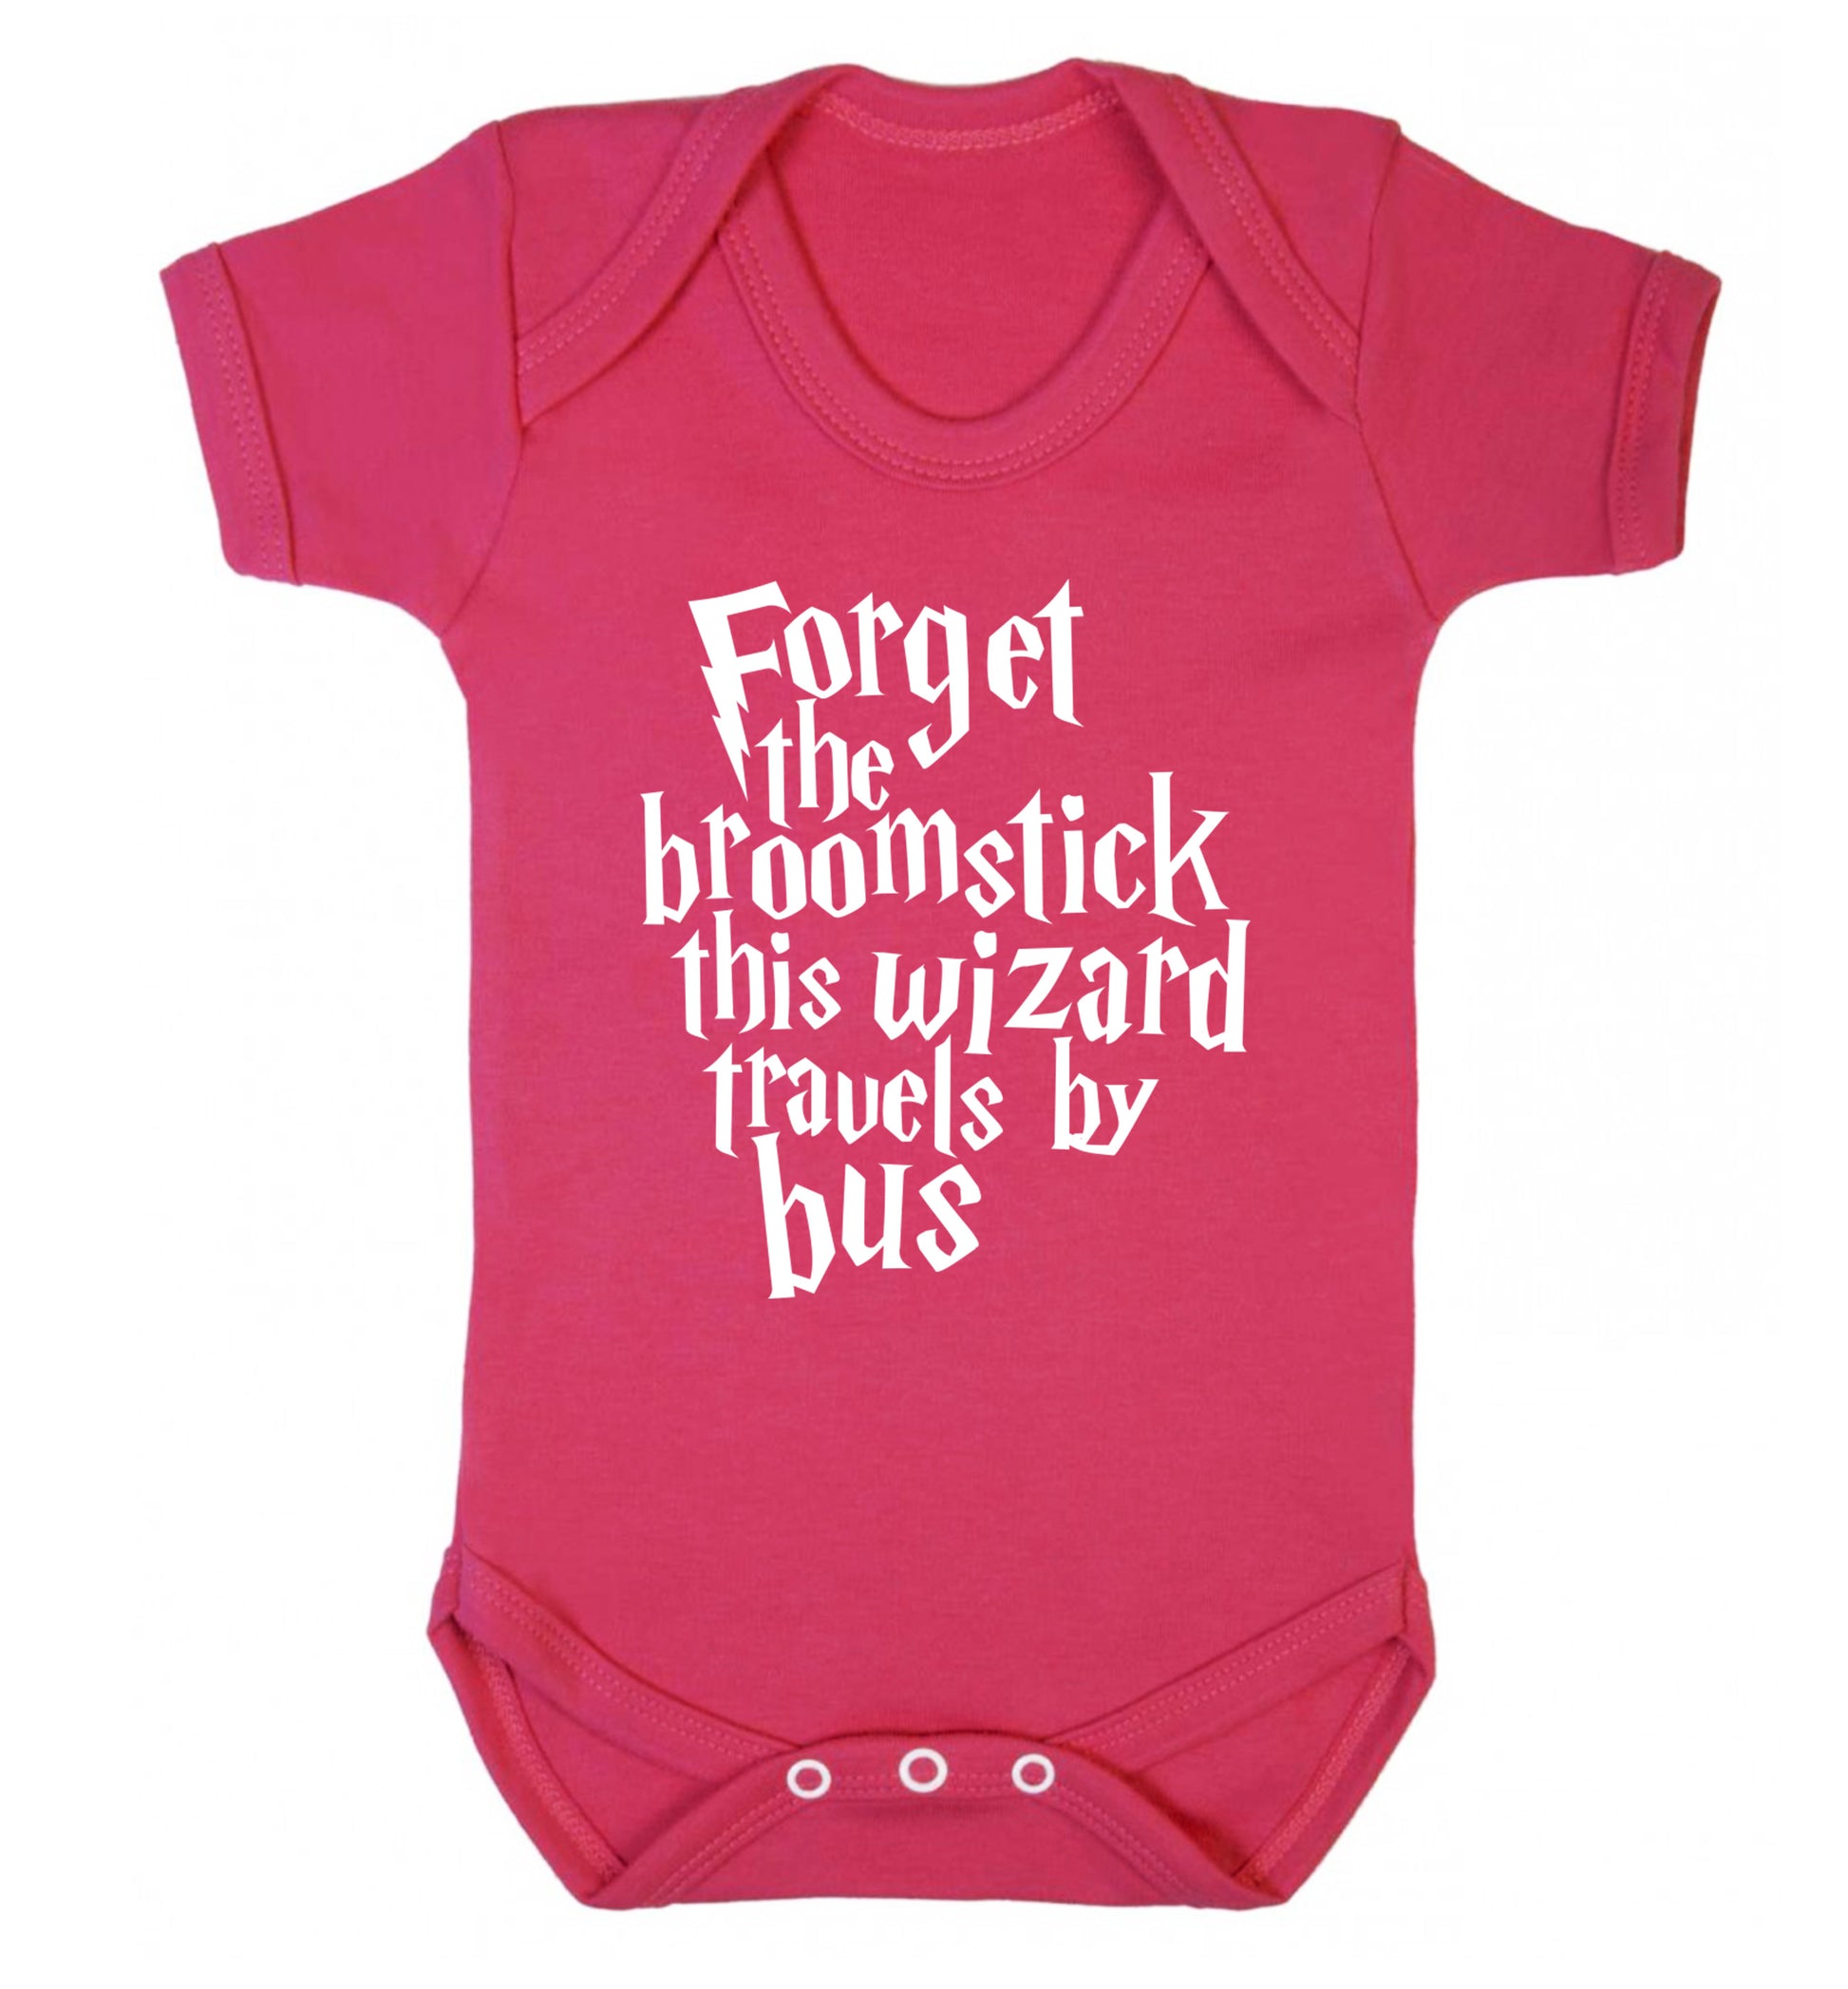 Forget the broomstick this wizard travels by bus Baby Vest dark pink 18-24 months